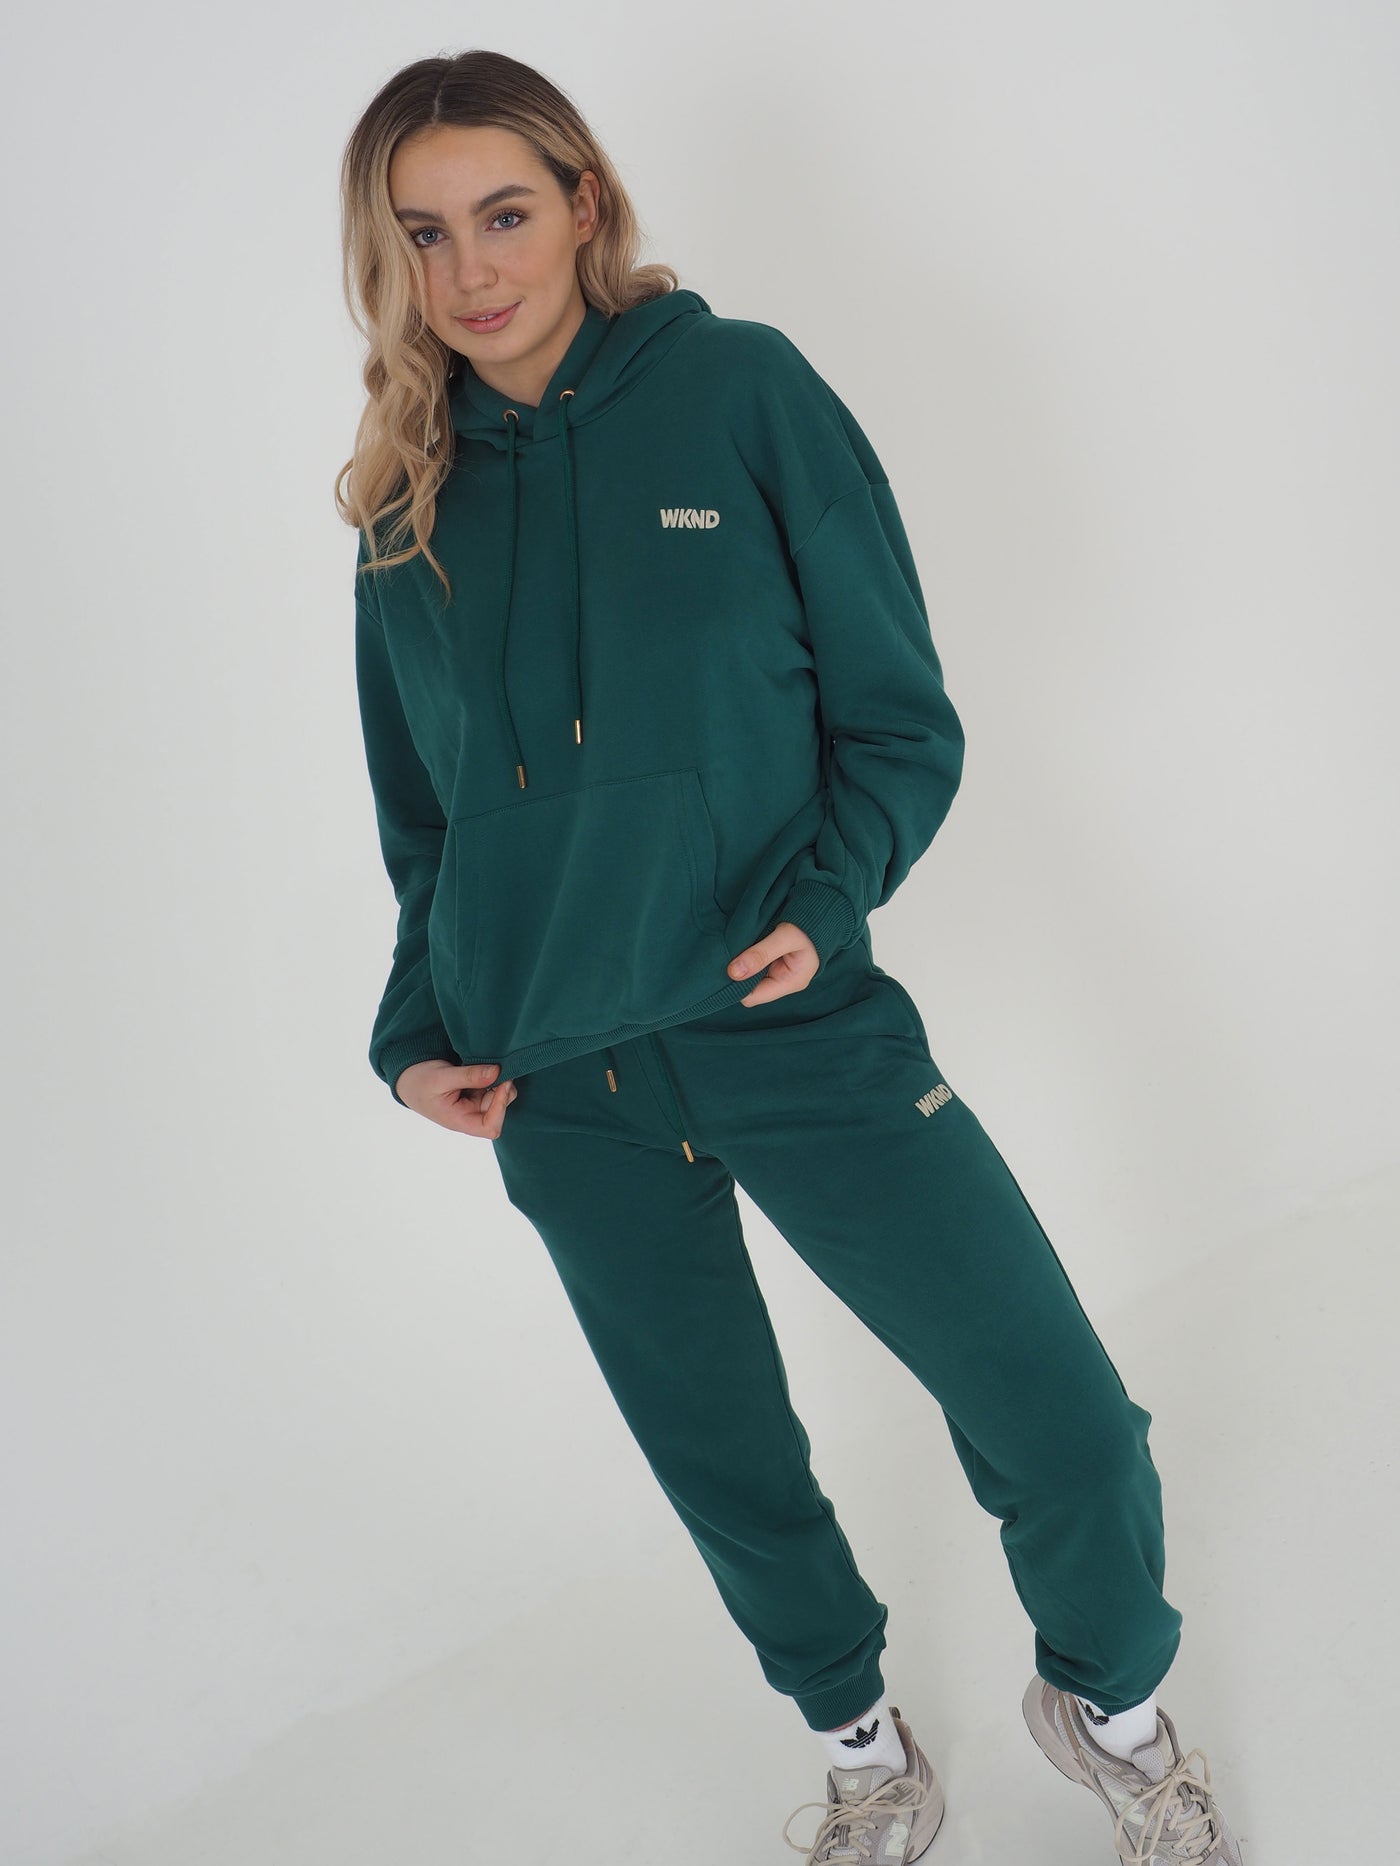 Model with blonde hair is wearing a green hoodie and matching joggers. WKND Embroidery to the chest and leg.